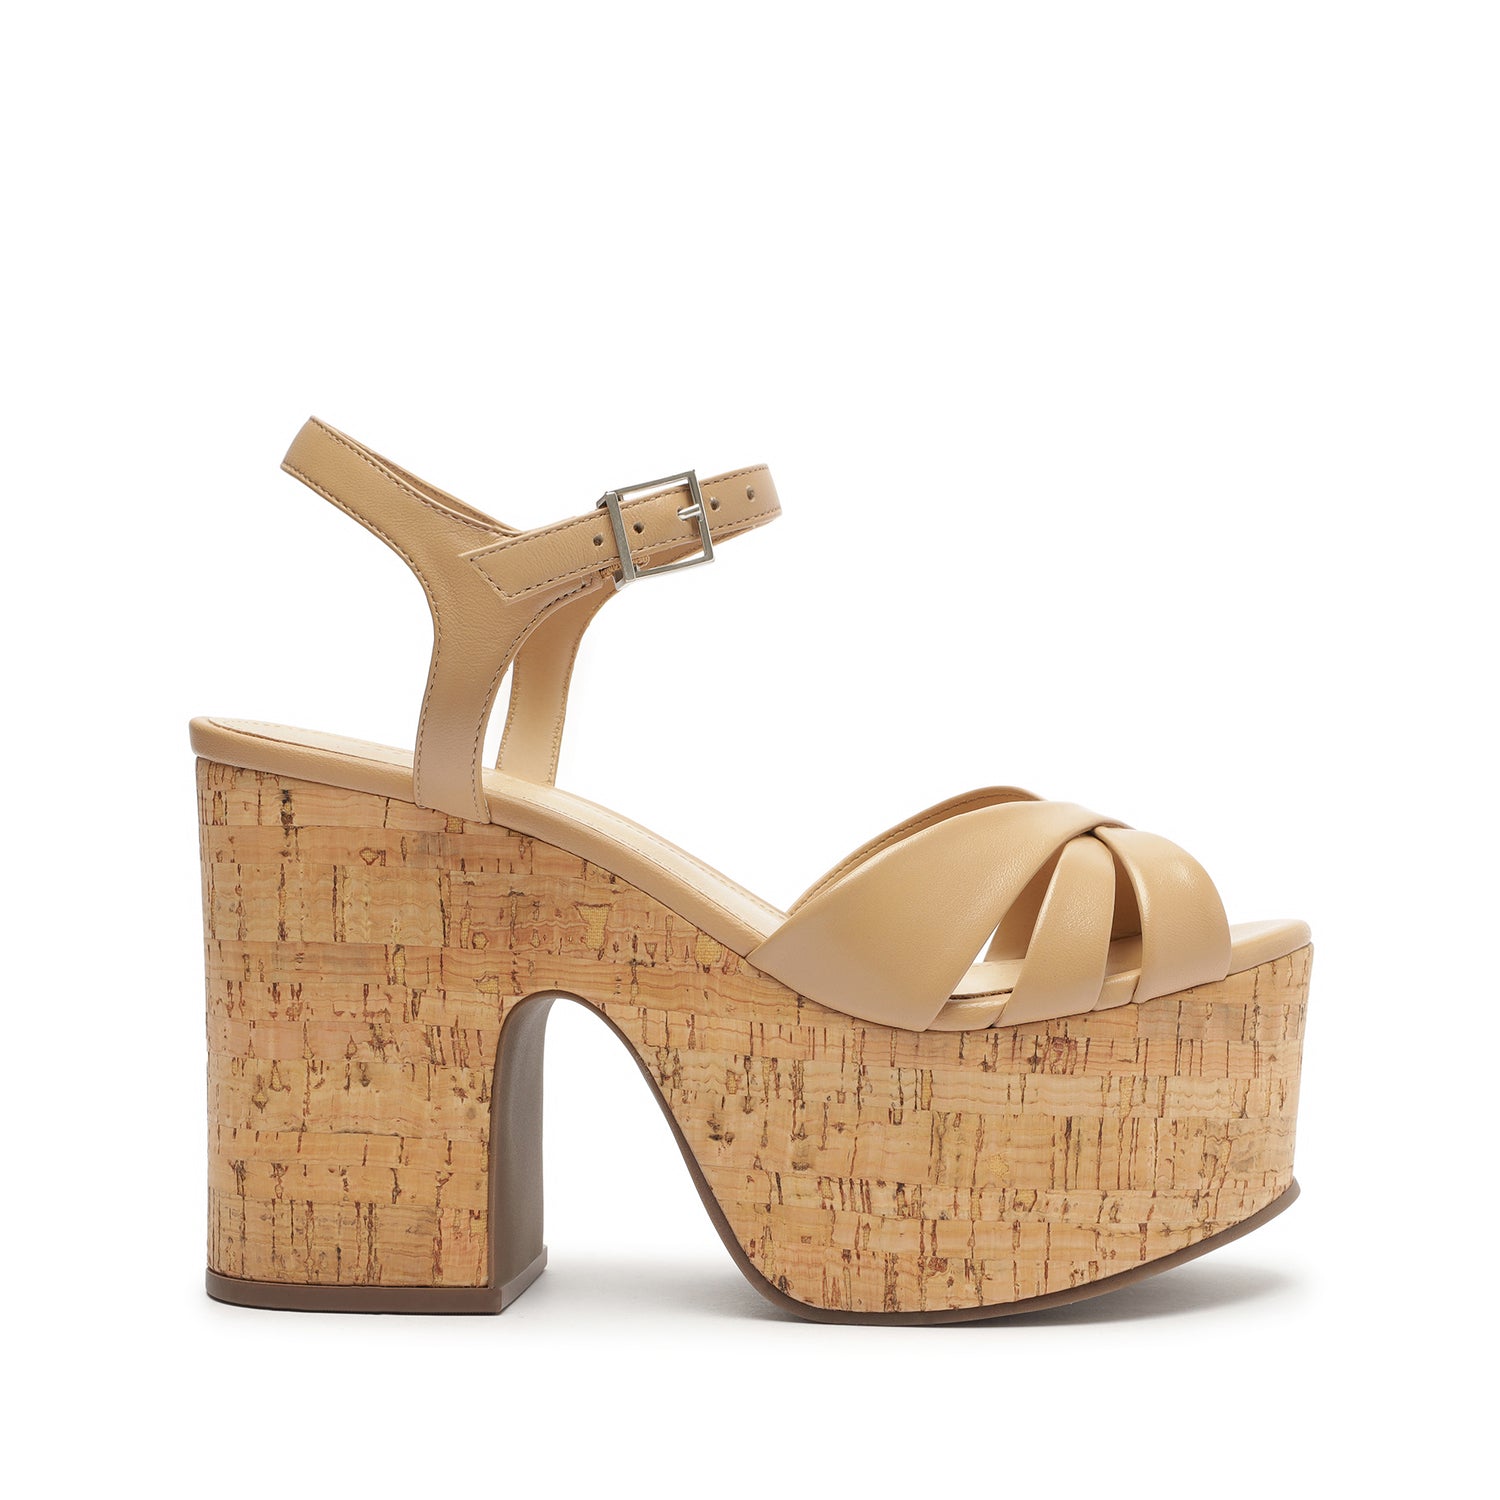 Keefa Cutout Nappa Leather Sandal Sandals Spring 23 5 True Beige Nappa Leather - Schutz Shoes